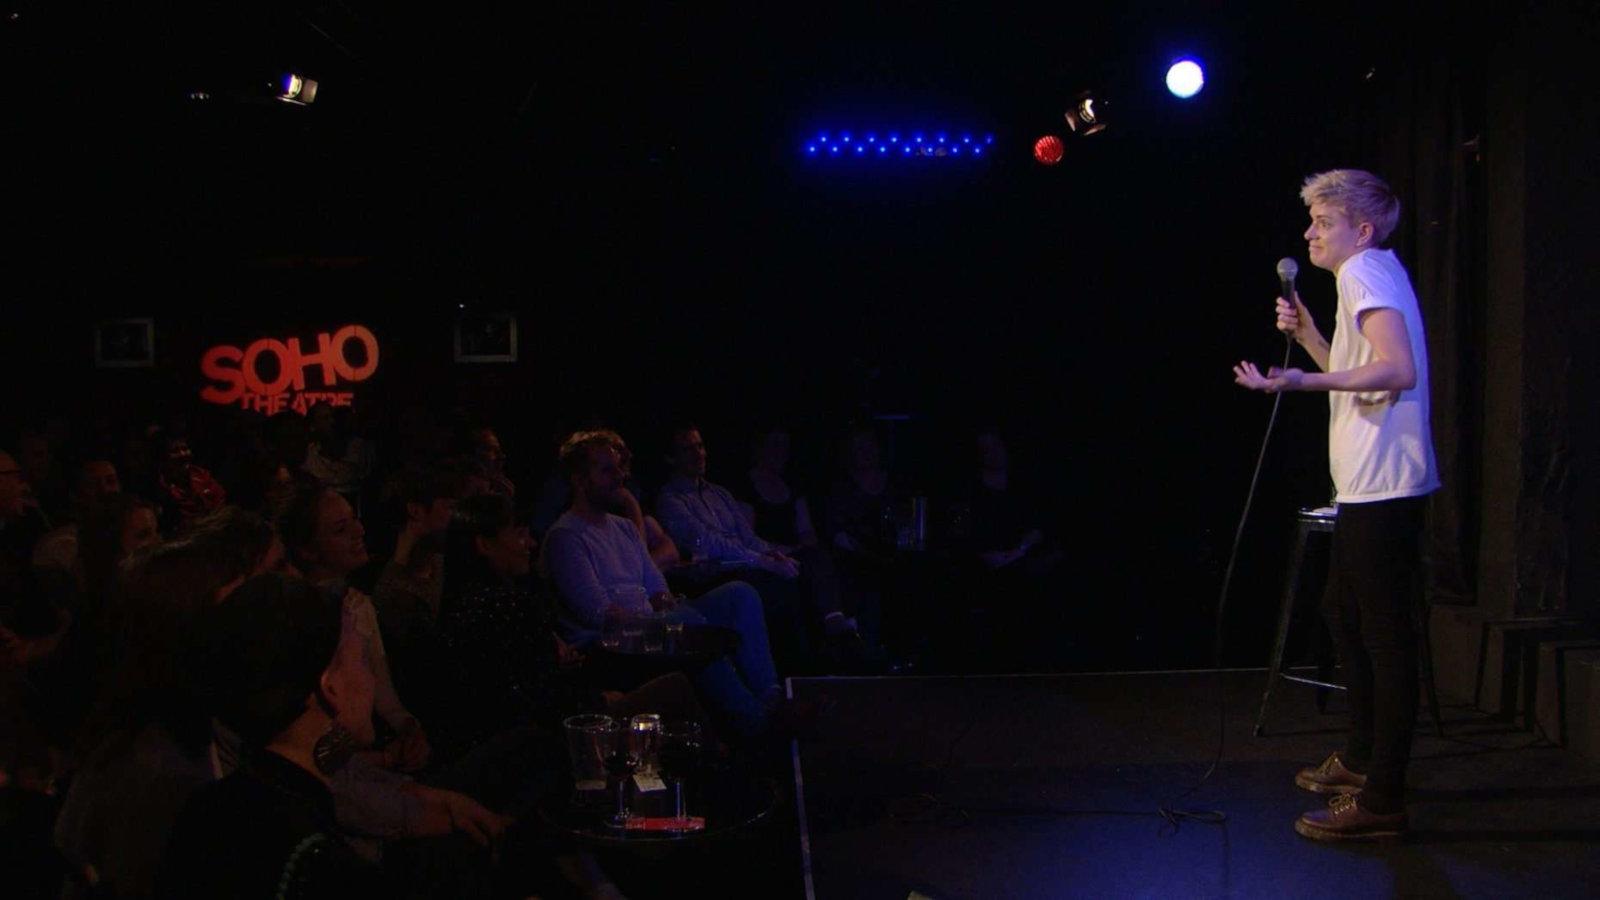 A comedian in a white t-shirt performing on stage in a dark room at the Soho Theatre in London, Soho Theatre is written on the wall in red.